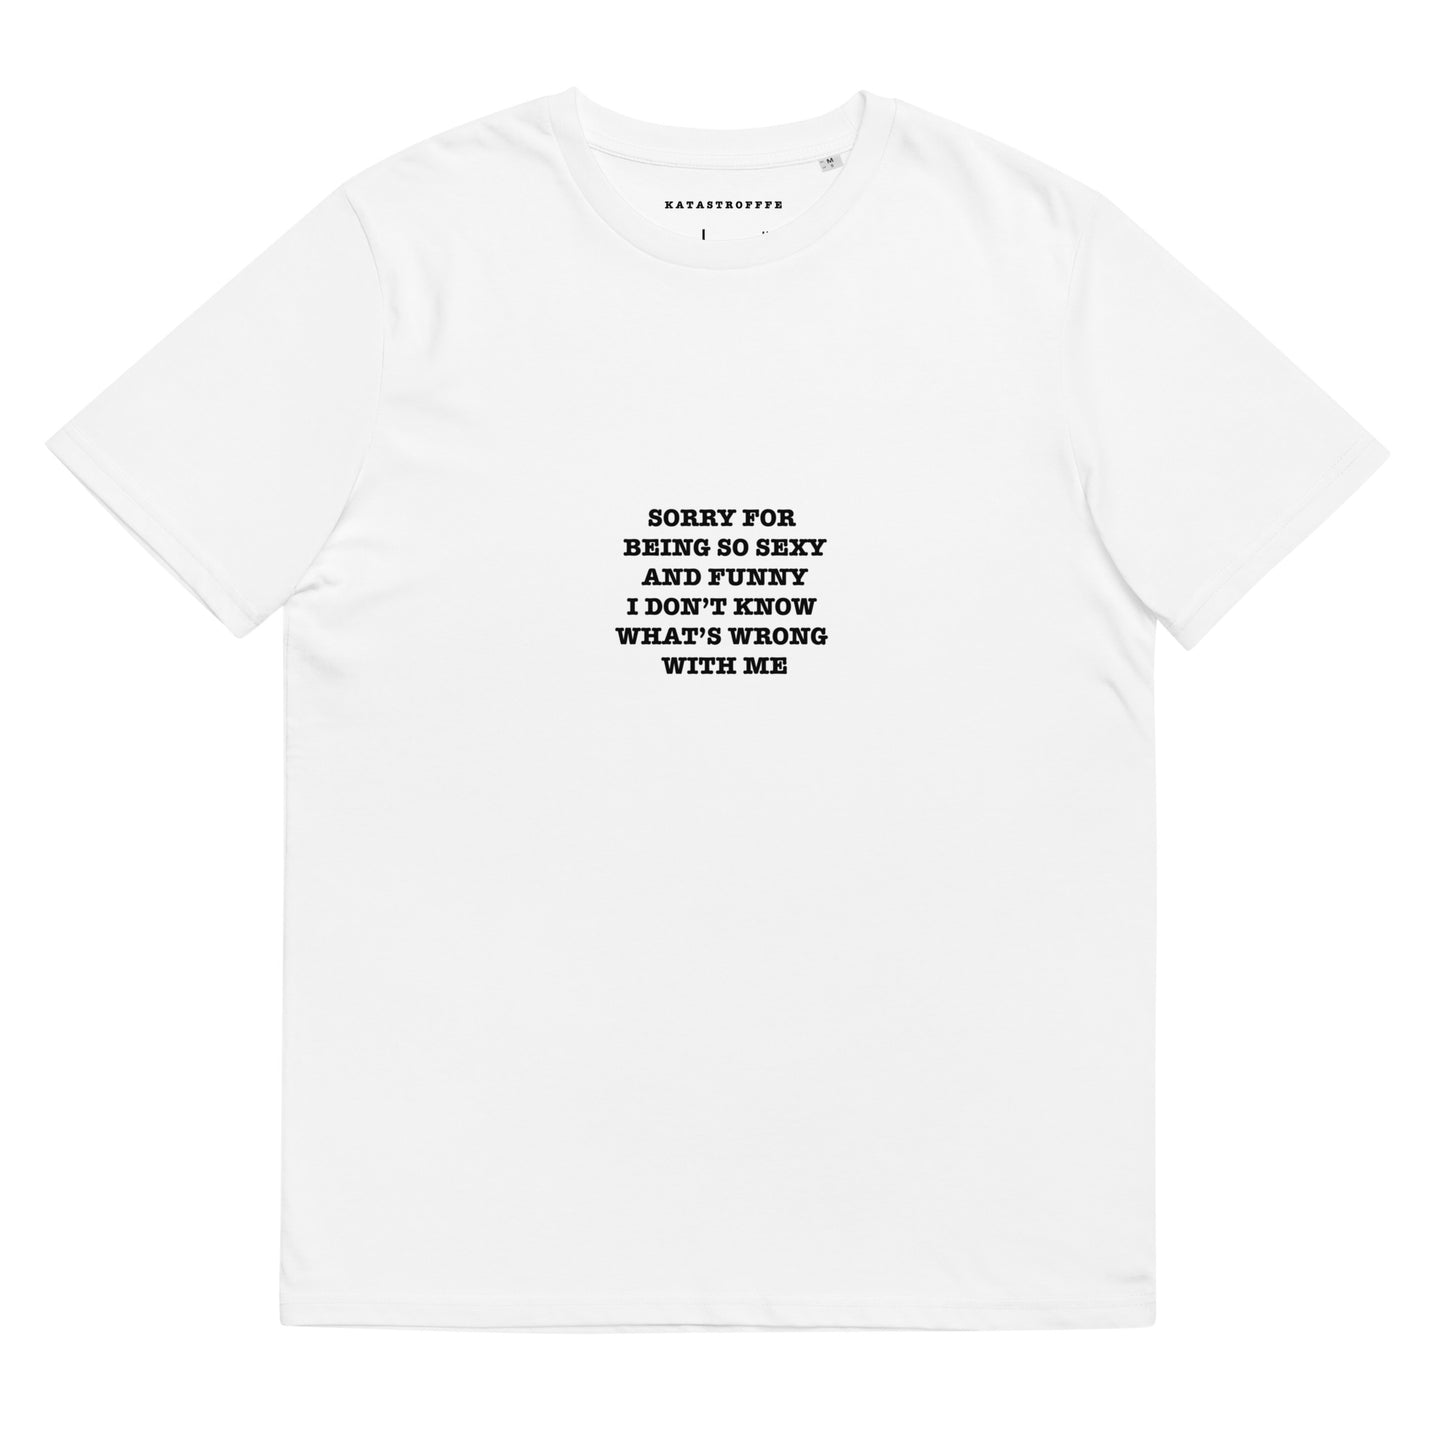 SORRY BEING SO SEXY AND FUNNY I DONT KNOW WHATS WRONG WITH ME Katastrofffe Unisex organic cotton t-shirt